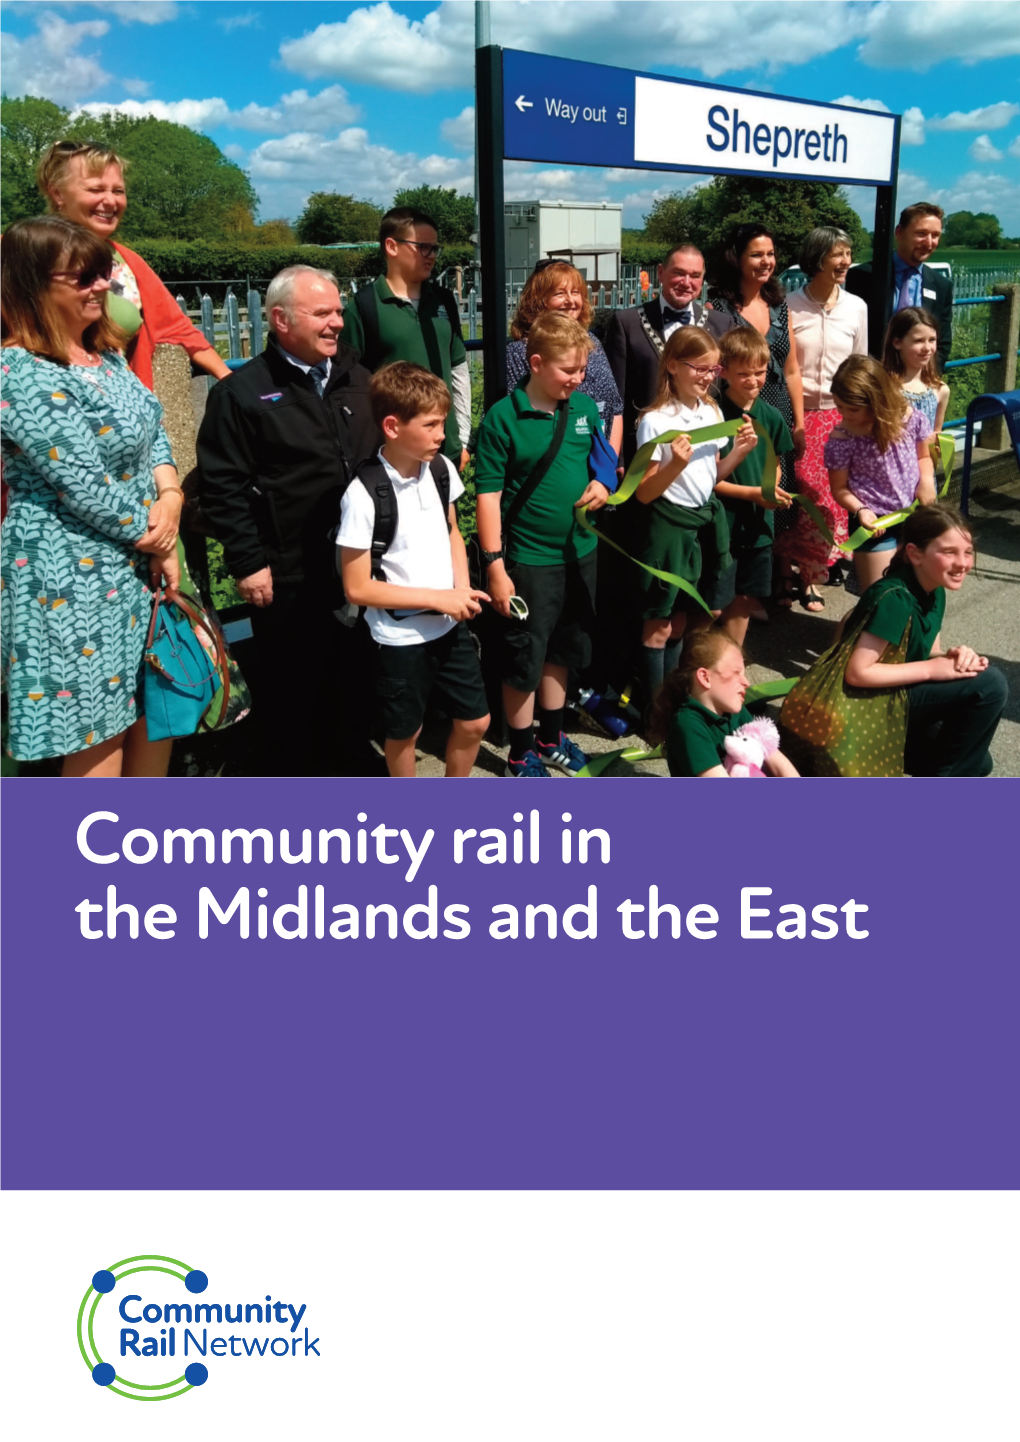 Community Rail in the Midlands and the East COMMUNITY RAIL in the MIDLANDS and the EAST